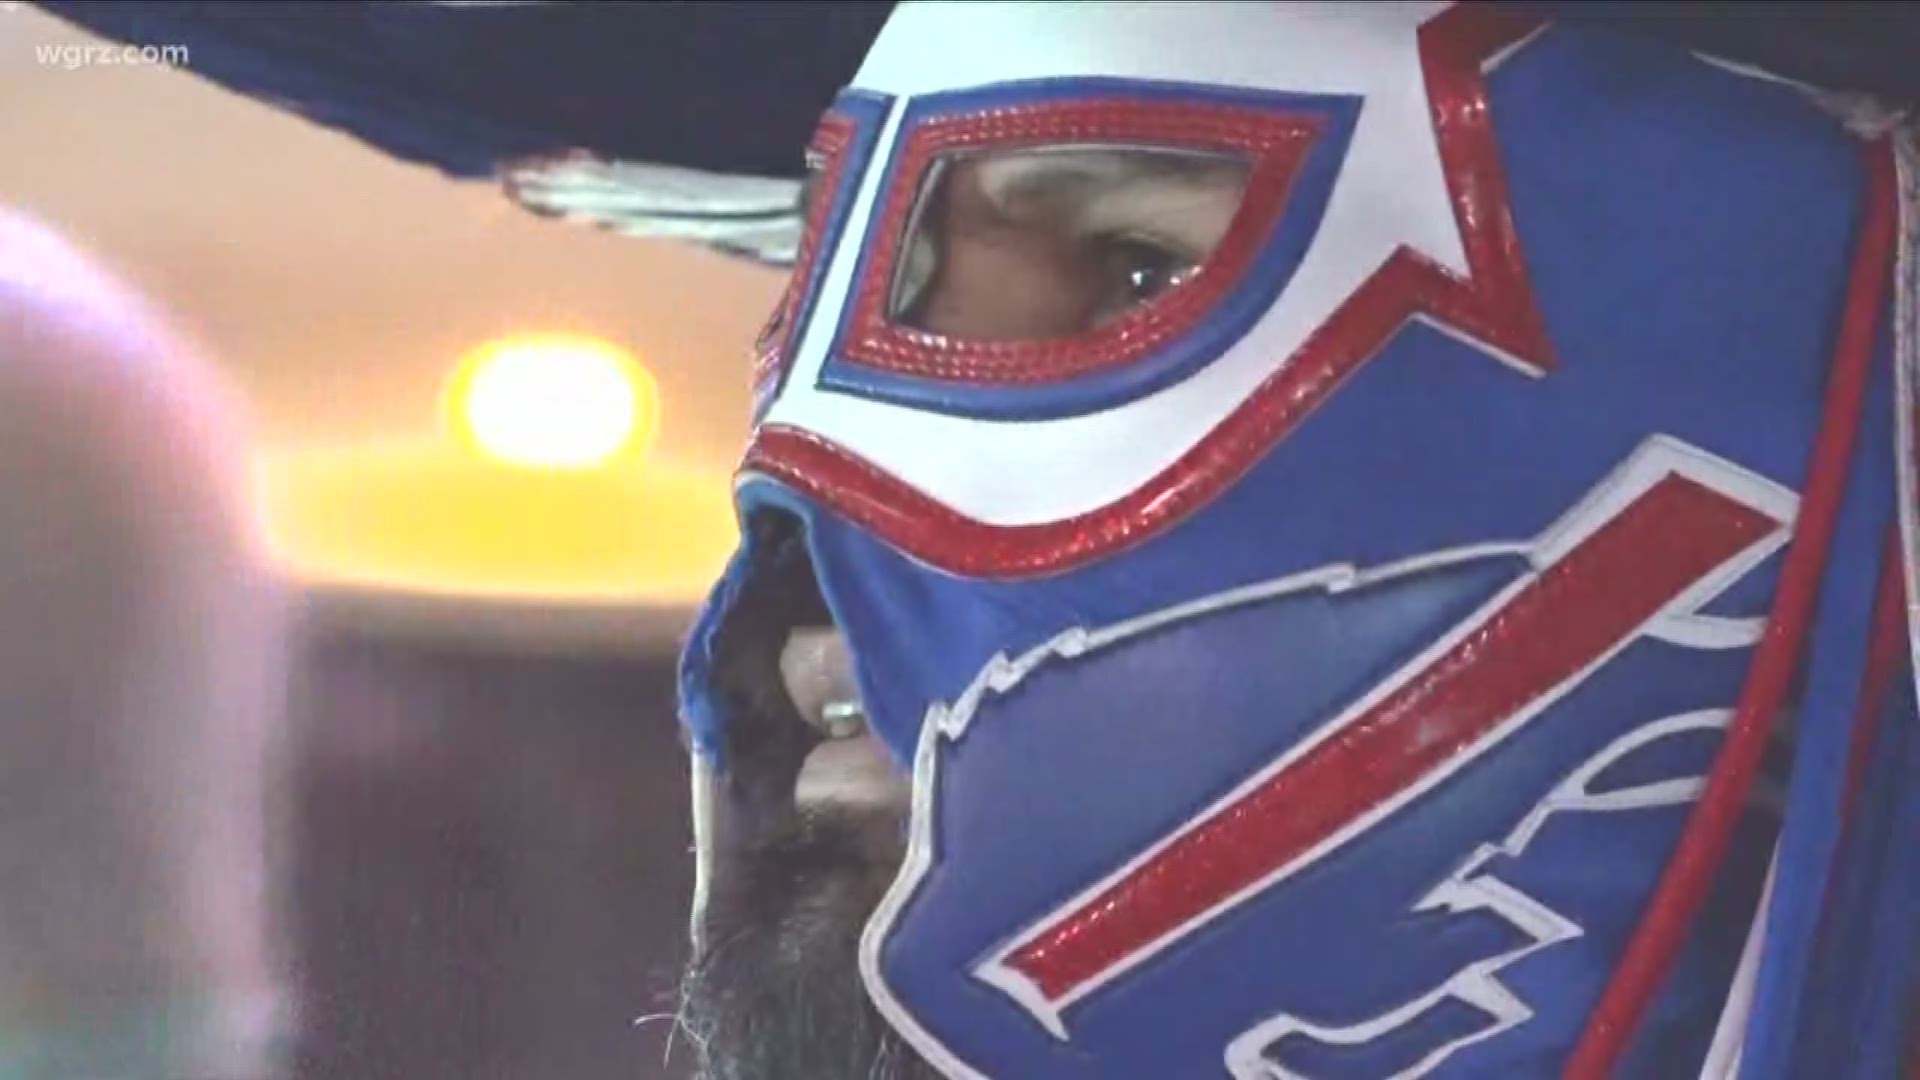 Bills superfan Pancho Billa will miss the draft due to his continuing battle with cancer.